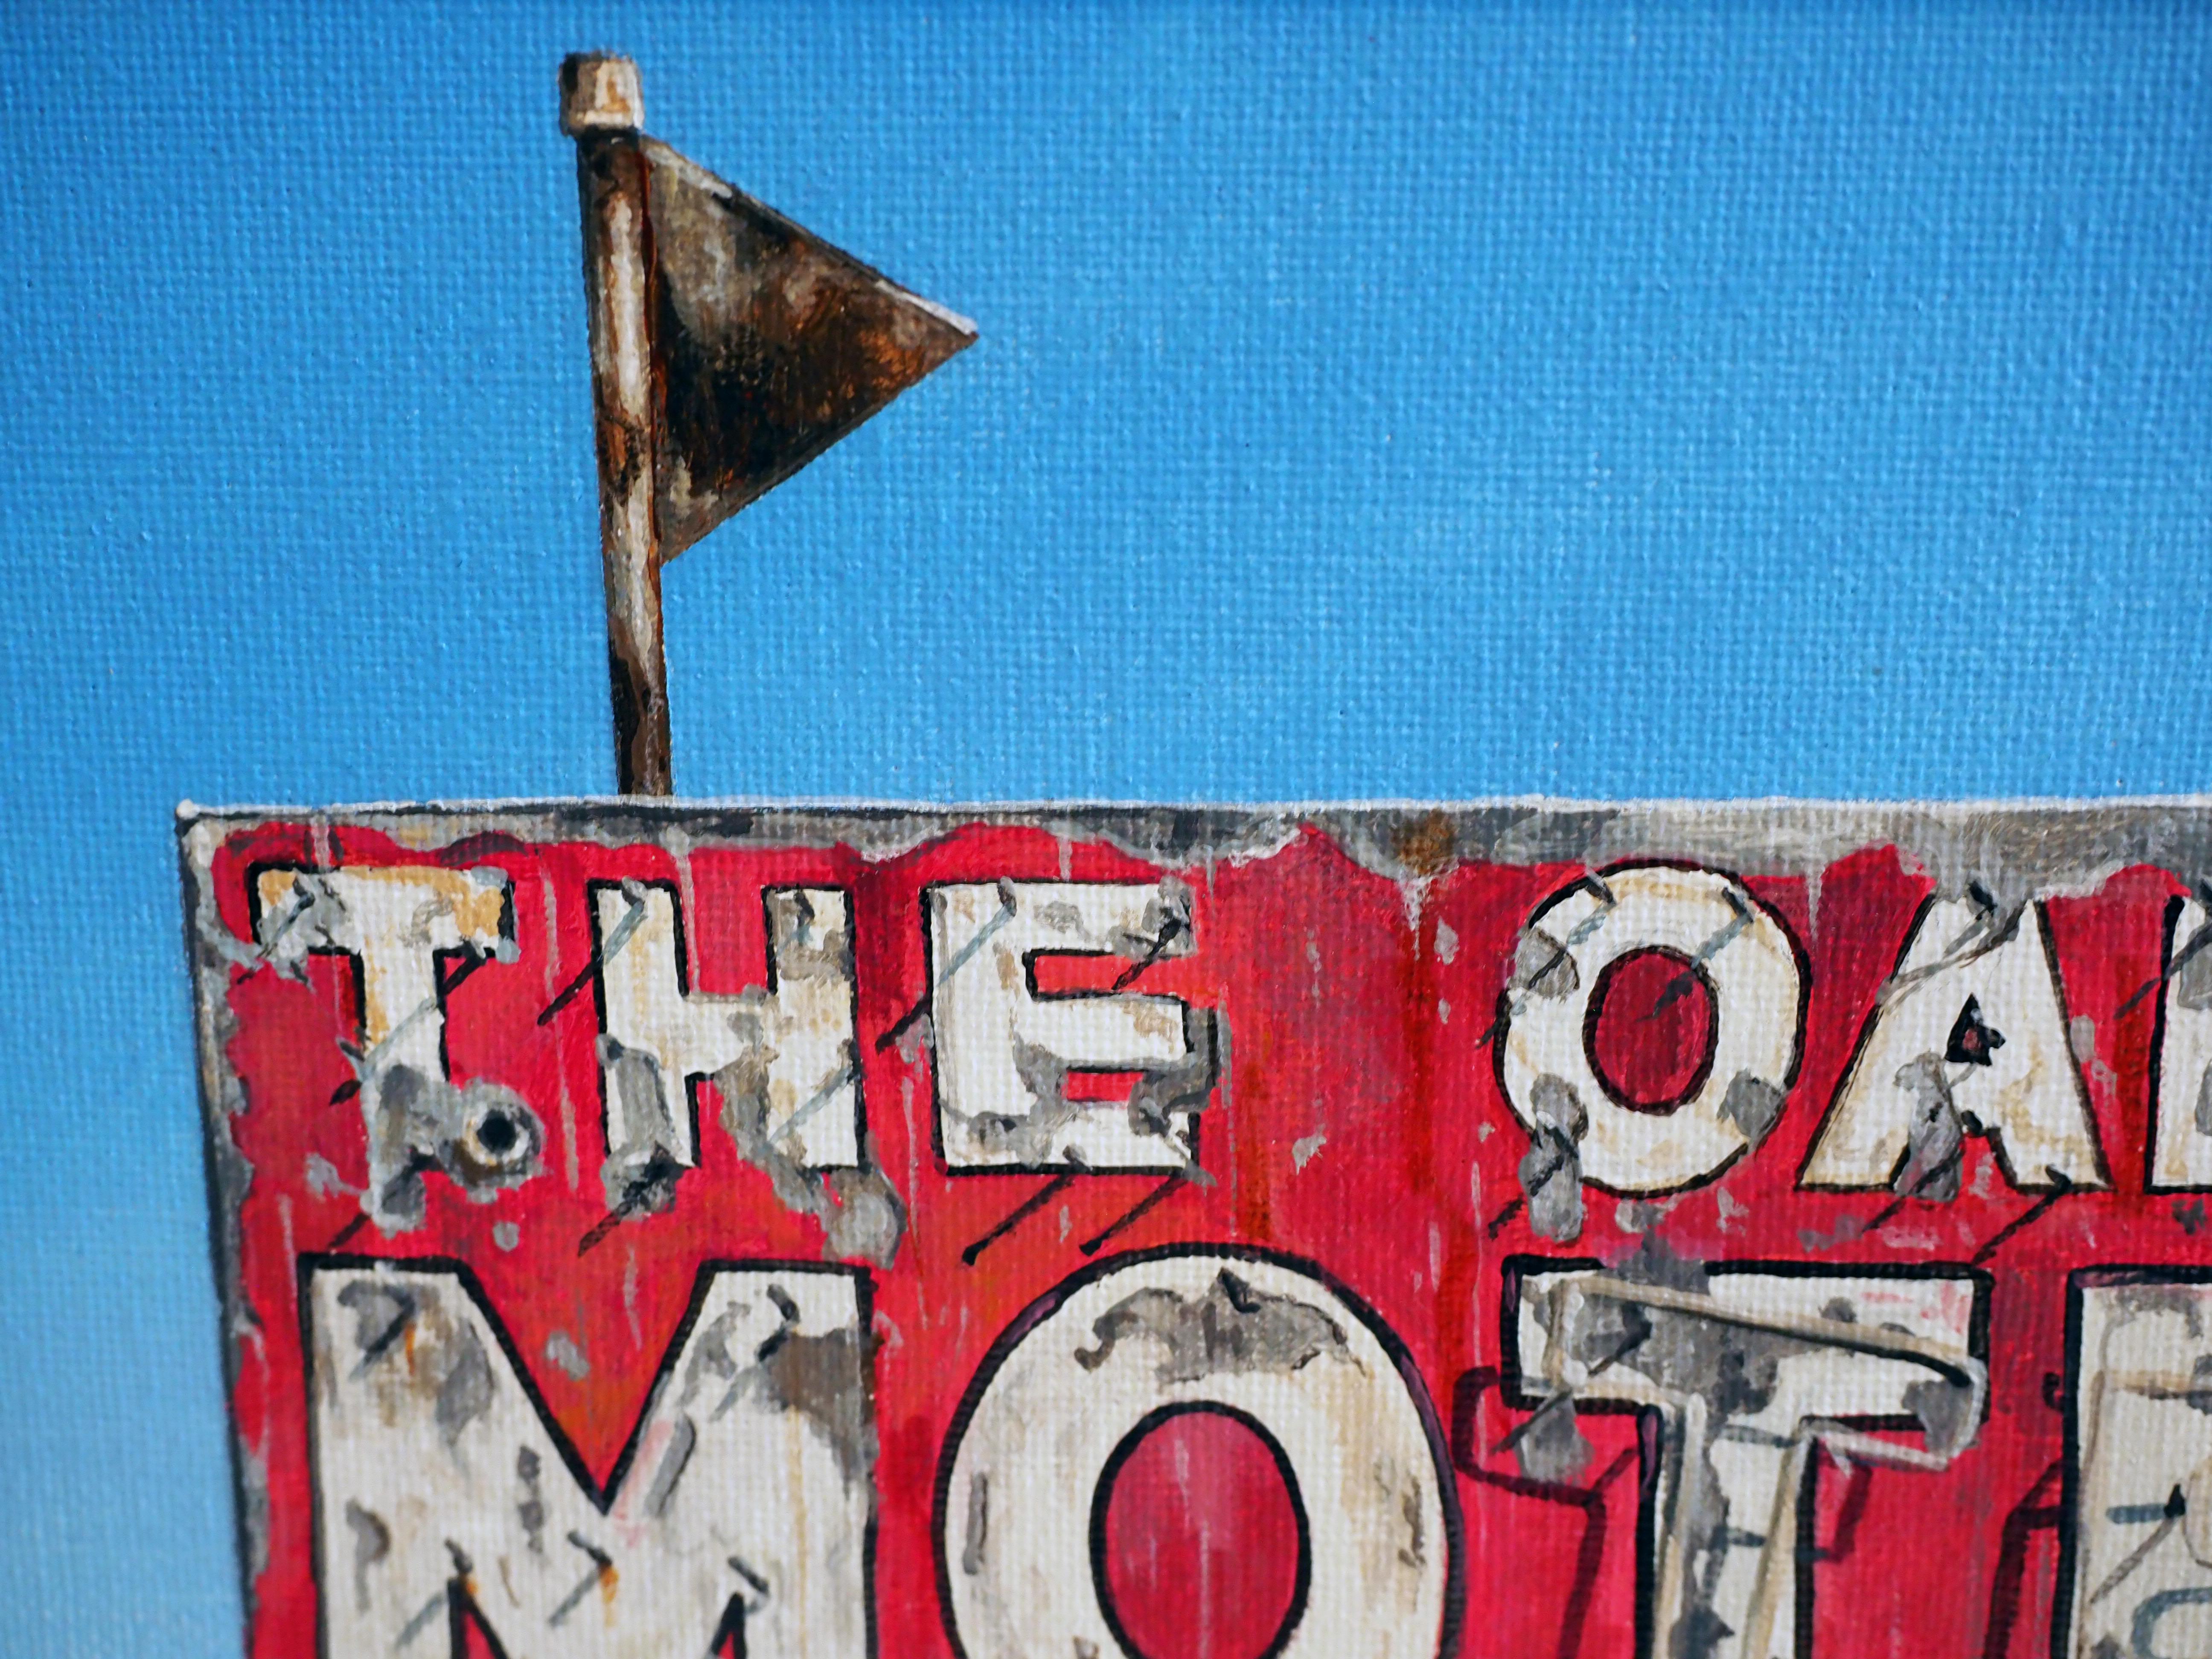 The Oaks Motel displays a vintage sign that showcases Sharp's high attention to detail is portrayed through his use of hyperrealist application of red, white, blue, and black hues. This particular painting is based on a roadside photograph of the